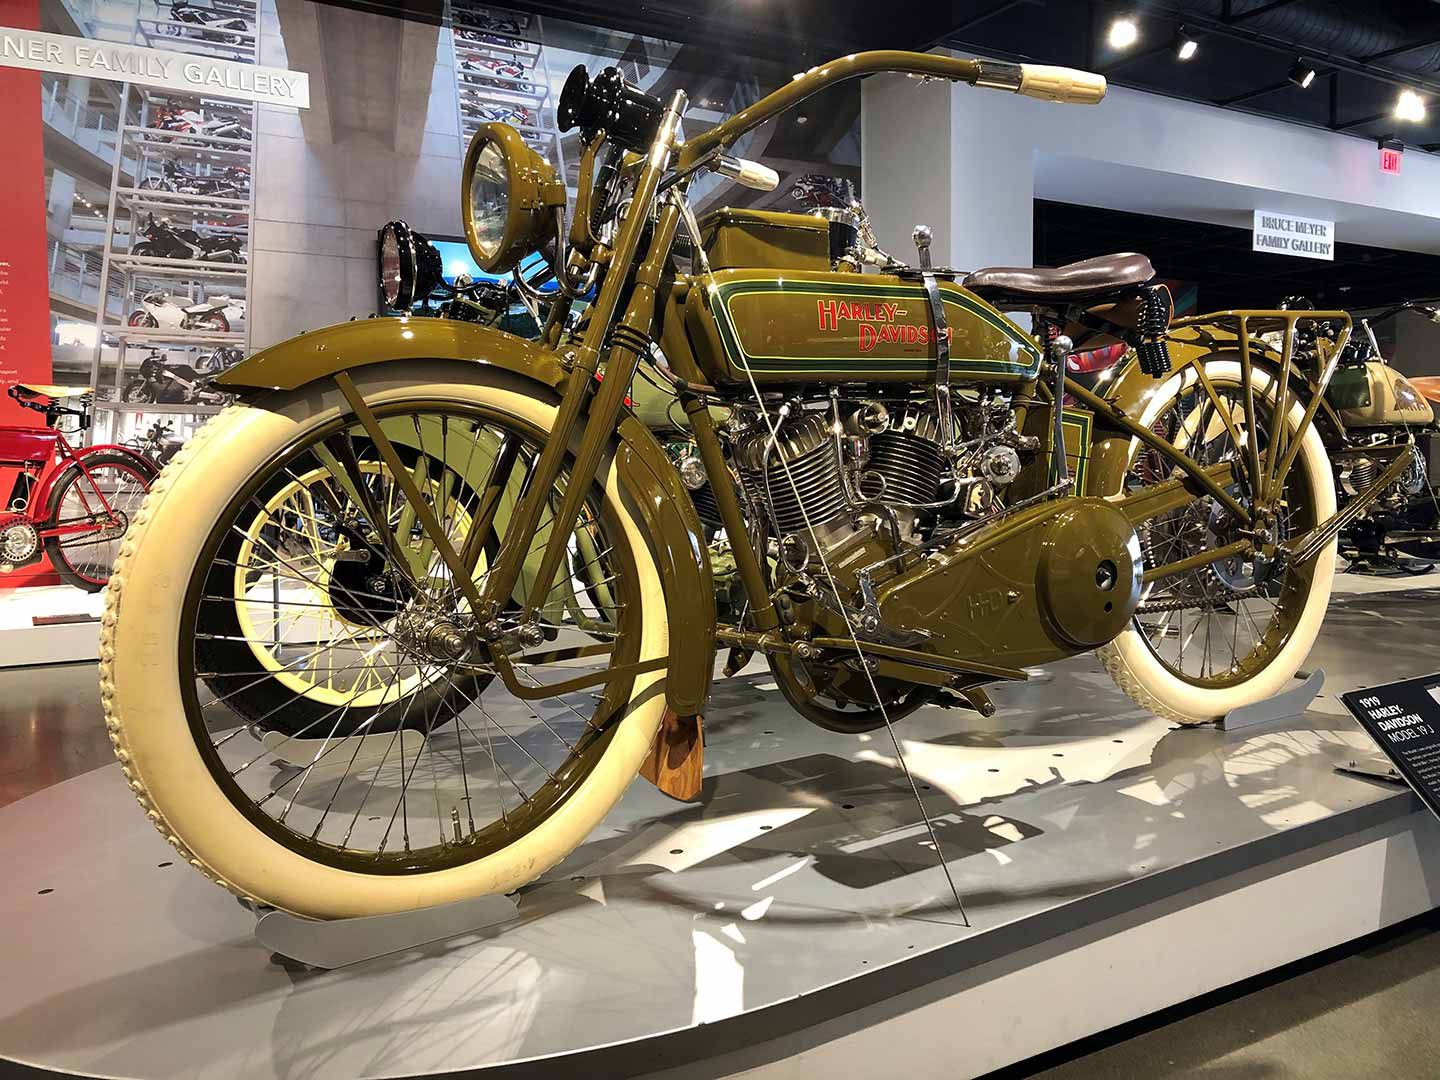 A beautifully restored 1919 Harley-Davidson Model J, featuring a 989cc V-twin, hardtail rear and no front brake.